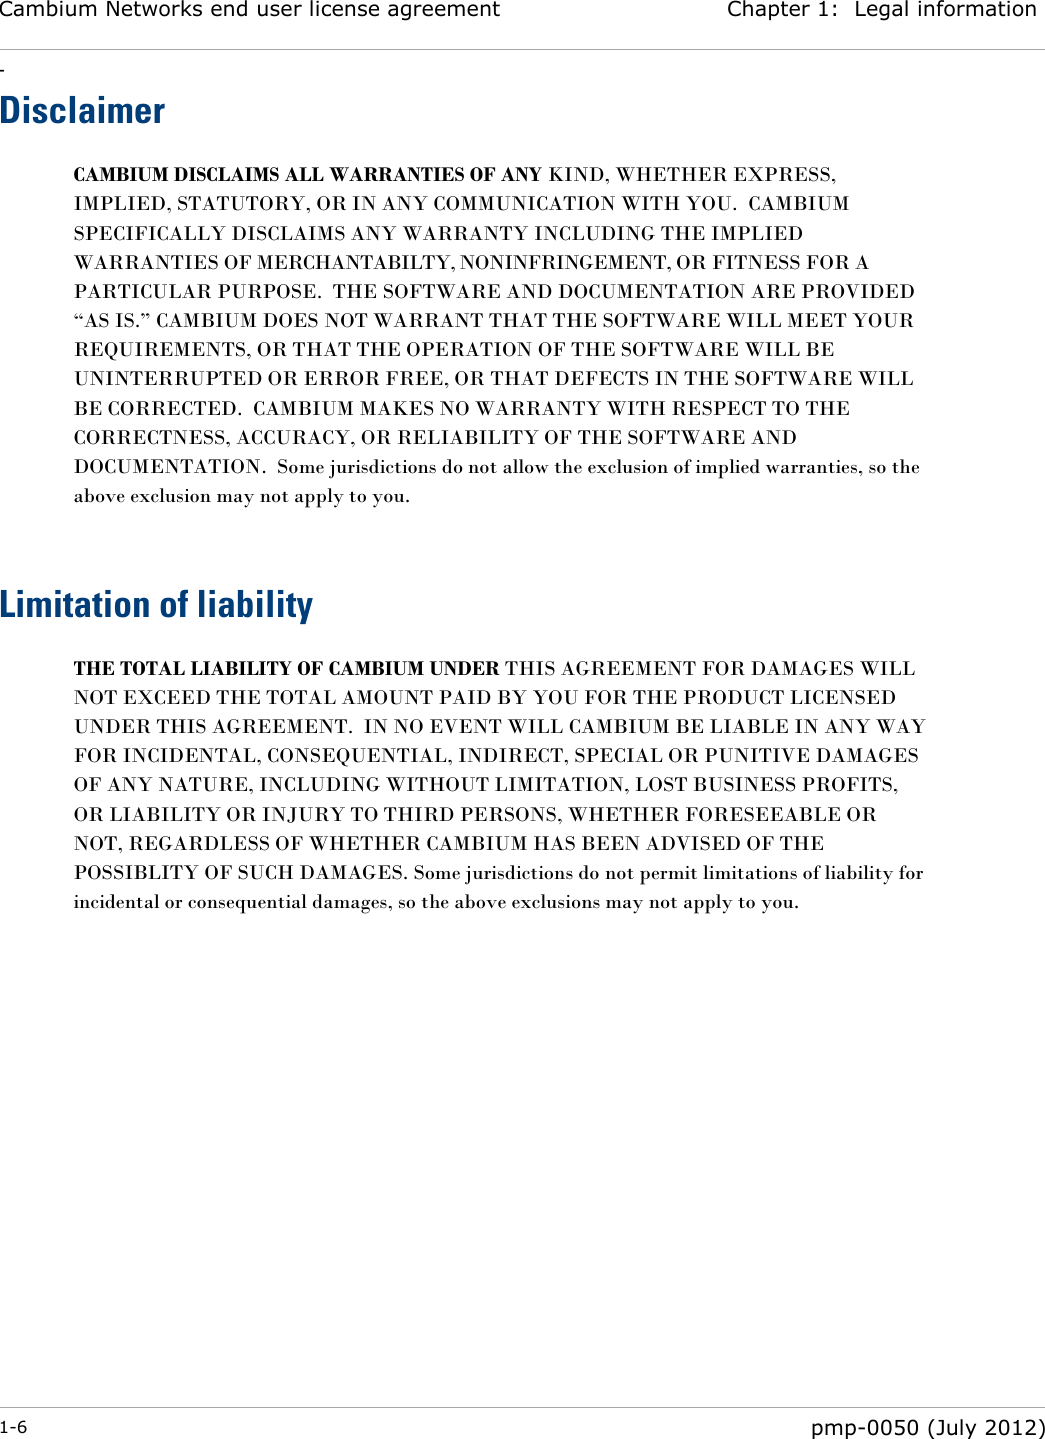 Cambium Networks end user license agreement Chapter 1:  Legal information - 1-6  pmp-0050 (July 2012)  Disclaimer CAMBIUM DISCLAIMS ALL WARRANTIES OF ANY KIND, WHETHER EXPRESS, IMPLIED, STATUTORY, OR IN ANY COMMUNICATION WITH YOU.  CAMBIUM SPECIFICALLY DISCLAIMS ANY WARRANTY INCLUDING THE IMPLIED WARRANTIES OF MERCHANTABILTY, NONINFRINGEMENT, OR FITNESS FOR A PARTICULAR PURPOSE.  THE SOFTWARE AND DOCUMENTATION ARE PROVIDED ―AS IS.‖ CAMBIUM DOES NOT WARRANT THAT THE SOFTWARE WILL MEET YOUR REQUIREMENTS, OR THAT THE OPERATION OF THE SOFTWARE WILL BE UNINTERRUPTED OR ERROR FREE, OR THAT DEFECTS IN THE SOFTWARE WILL BE CORRECTED.  CAMBIUM MAKES NO WARRANTY WITH RESPECT TO THE CORRECTNESS, ACCURACY, OR RELIABILITY OF THE SOFTWARE AND DOCUMENTATION.  Some jurisdictions do not allow the exclusion of implied warranties, so the above exclusion may not apply to you.   Limitation of liability THE TOTAL LIABILITY OF CAMBIUM UNDER THIS AGREEMENT FOR DAMAGES WILL NOT EXCEED THE TOTAL AMOUNT PAID BY YOU FOR THE PRODUCT LICENSED UNDER THIS AGREEMENT.  IN NO EVENT WILL CAMBIUM BE LIABLE IN ANY WAY FOR INCIDENTAL, CONSEQUENTIAL, INDIRECT, SPECIAL OR PUNITIVE DAMAGES OF ANY NATURE, INCLUDING WITHOUT LIMITATION, LOST BUSINESS PROFITS, OR LIABILITY OR INJURY TO THIRD PERSONS, WHETHER FORESEEABLE OR NOT, REGARDLESS OF WHETHER CAMBIUM HAS BEEN ADVISED OF THE POSSIBLITY OF SUCH DAMAGES. Some jurisdictions do not permit limitations of liability for incidental or consequential damages, so the above exclusions may not apply to you.   